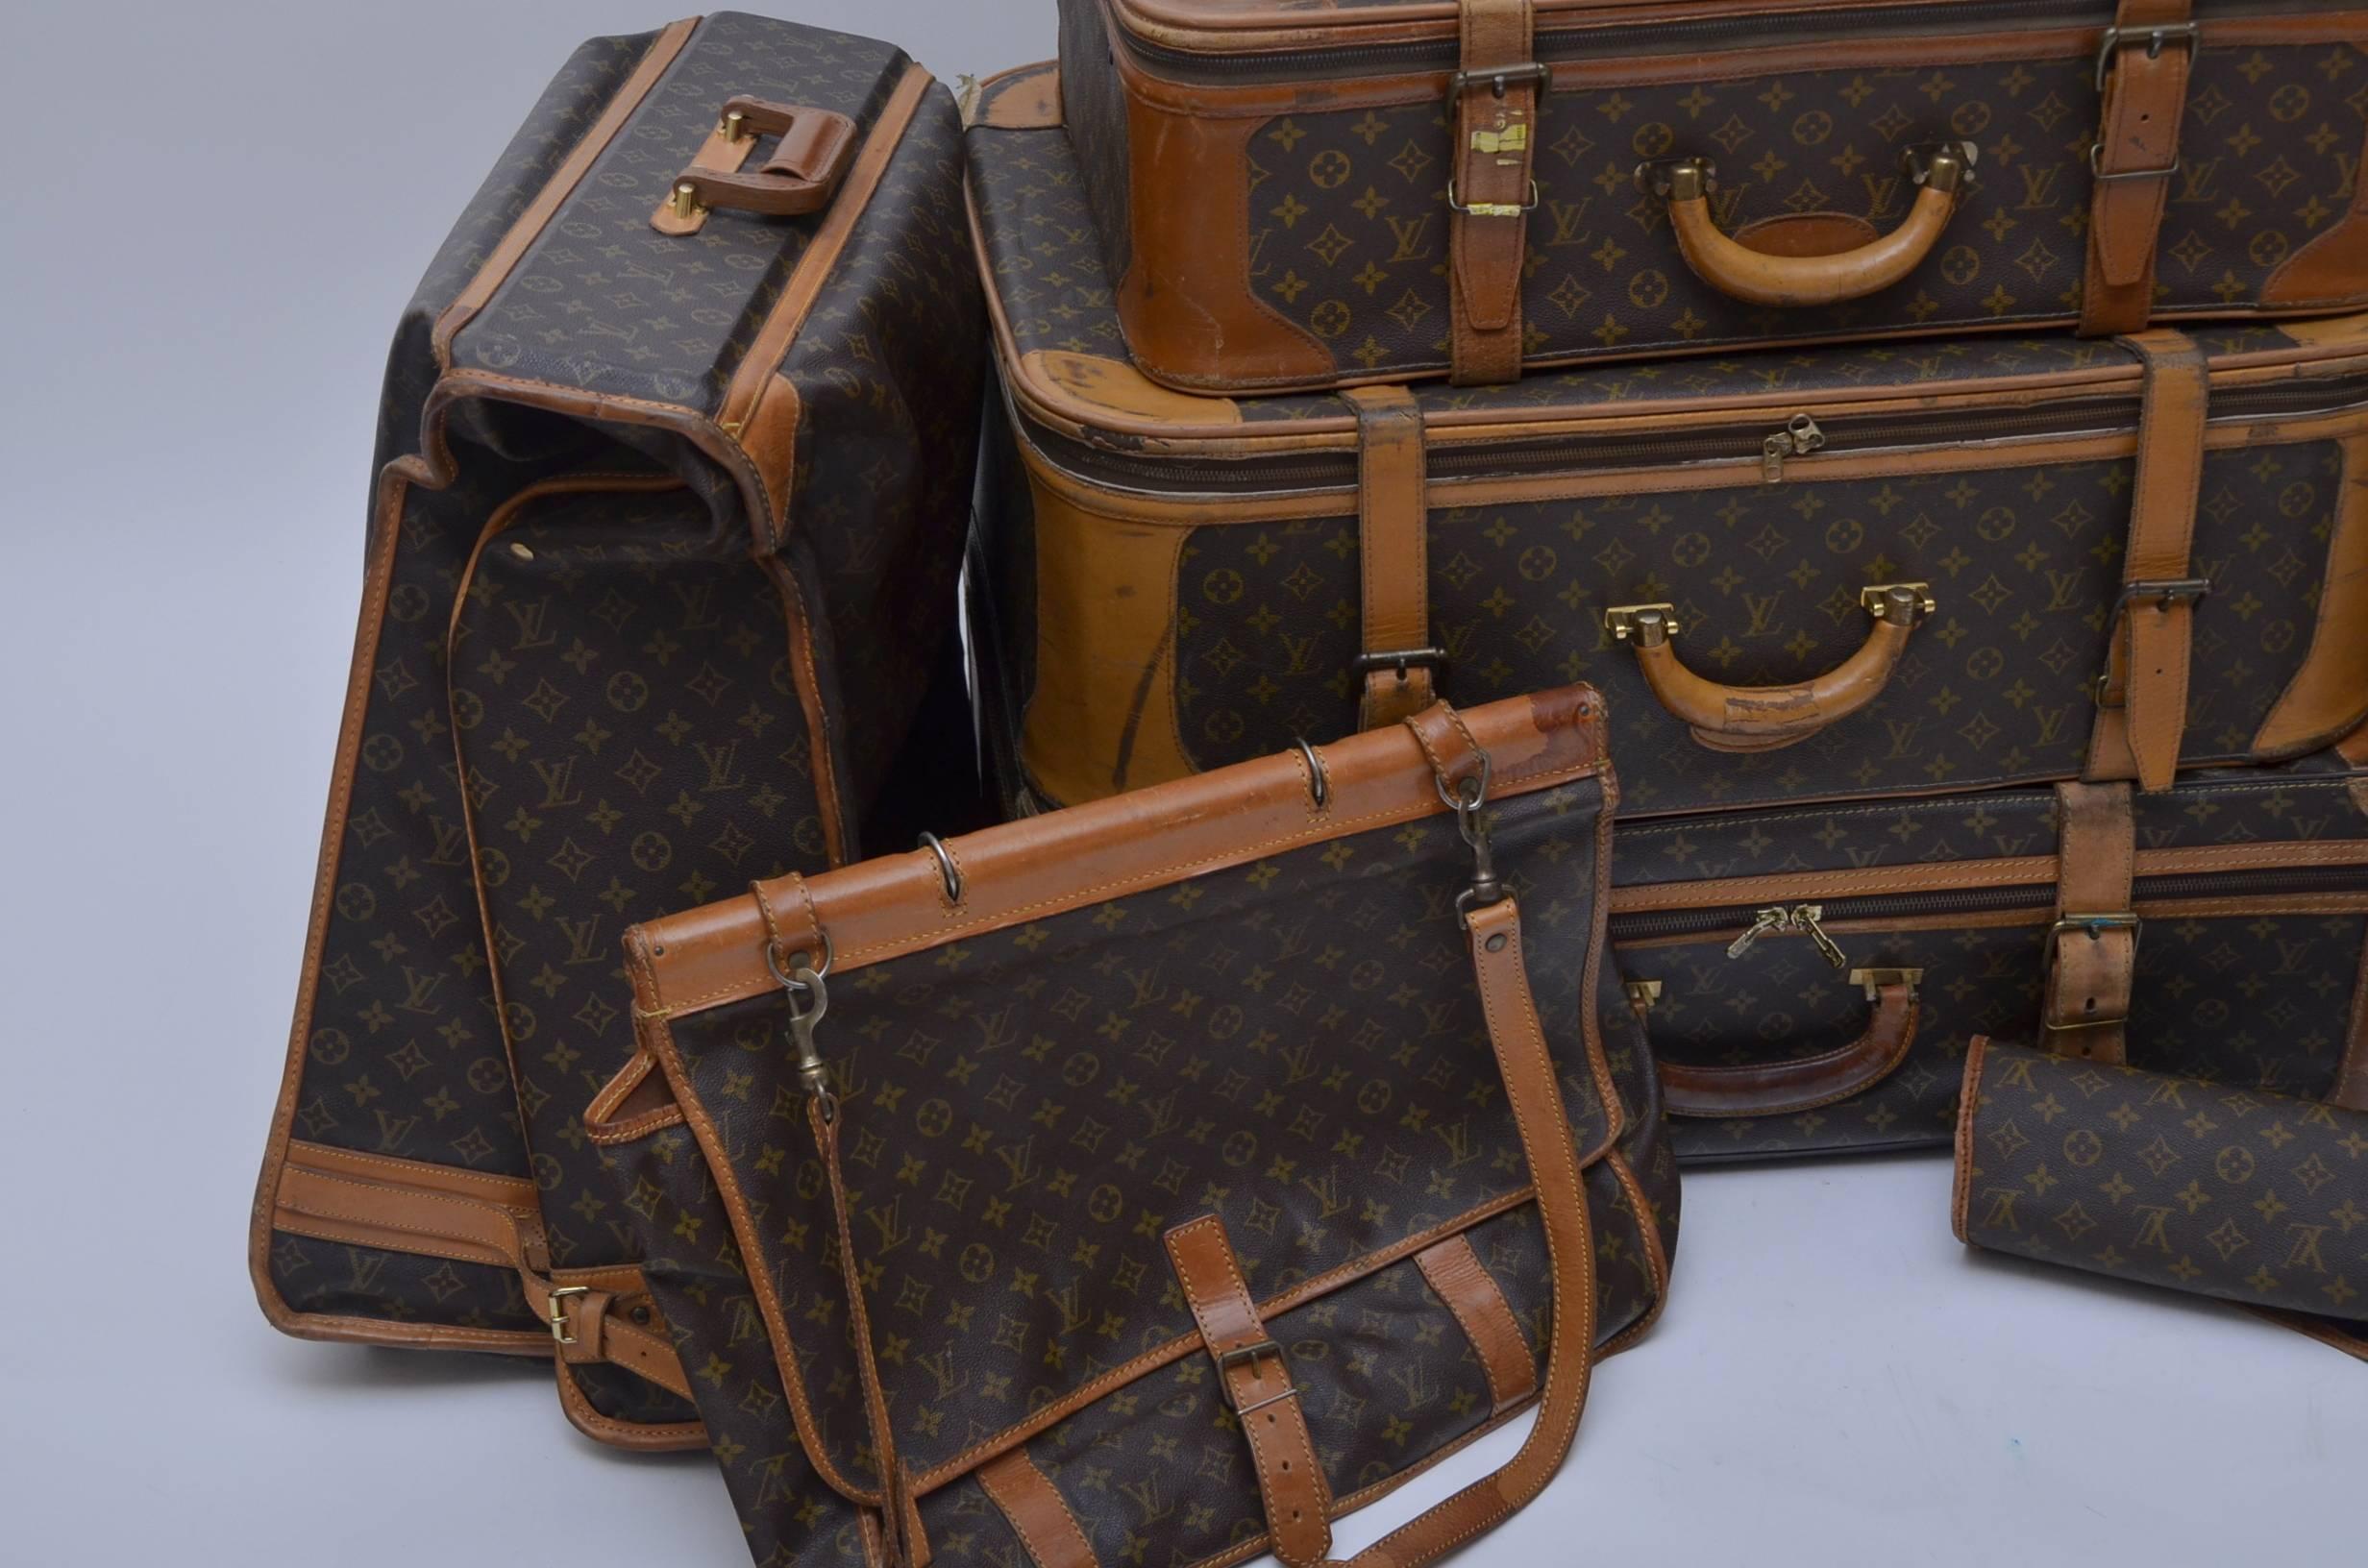 Louis Vuitton 8 piece traveling luggage.
They date from 1970's to 1990's .
Condition is good vintage.
Some pieces have some stains inside .I could not download all photographs  but if you message me i can send few more pictures.
All zippers in